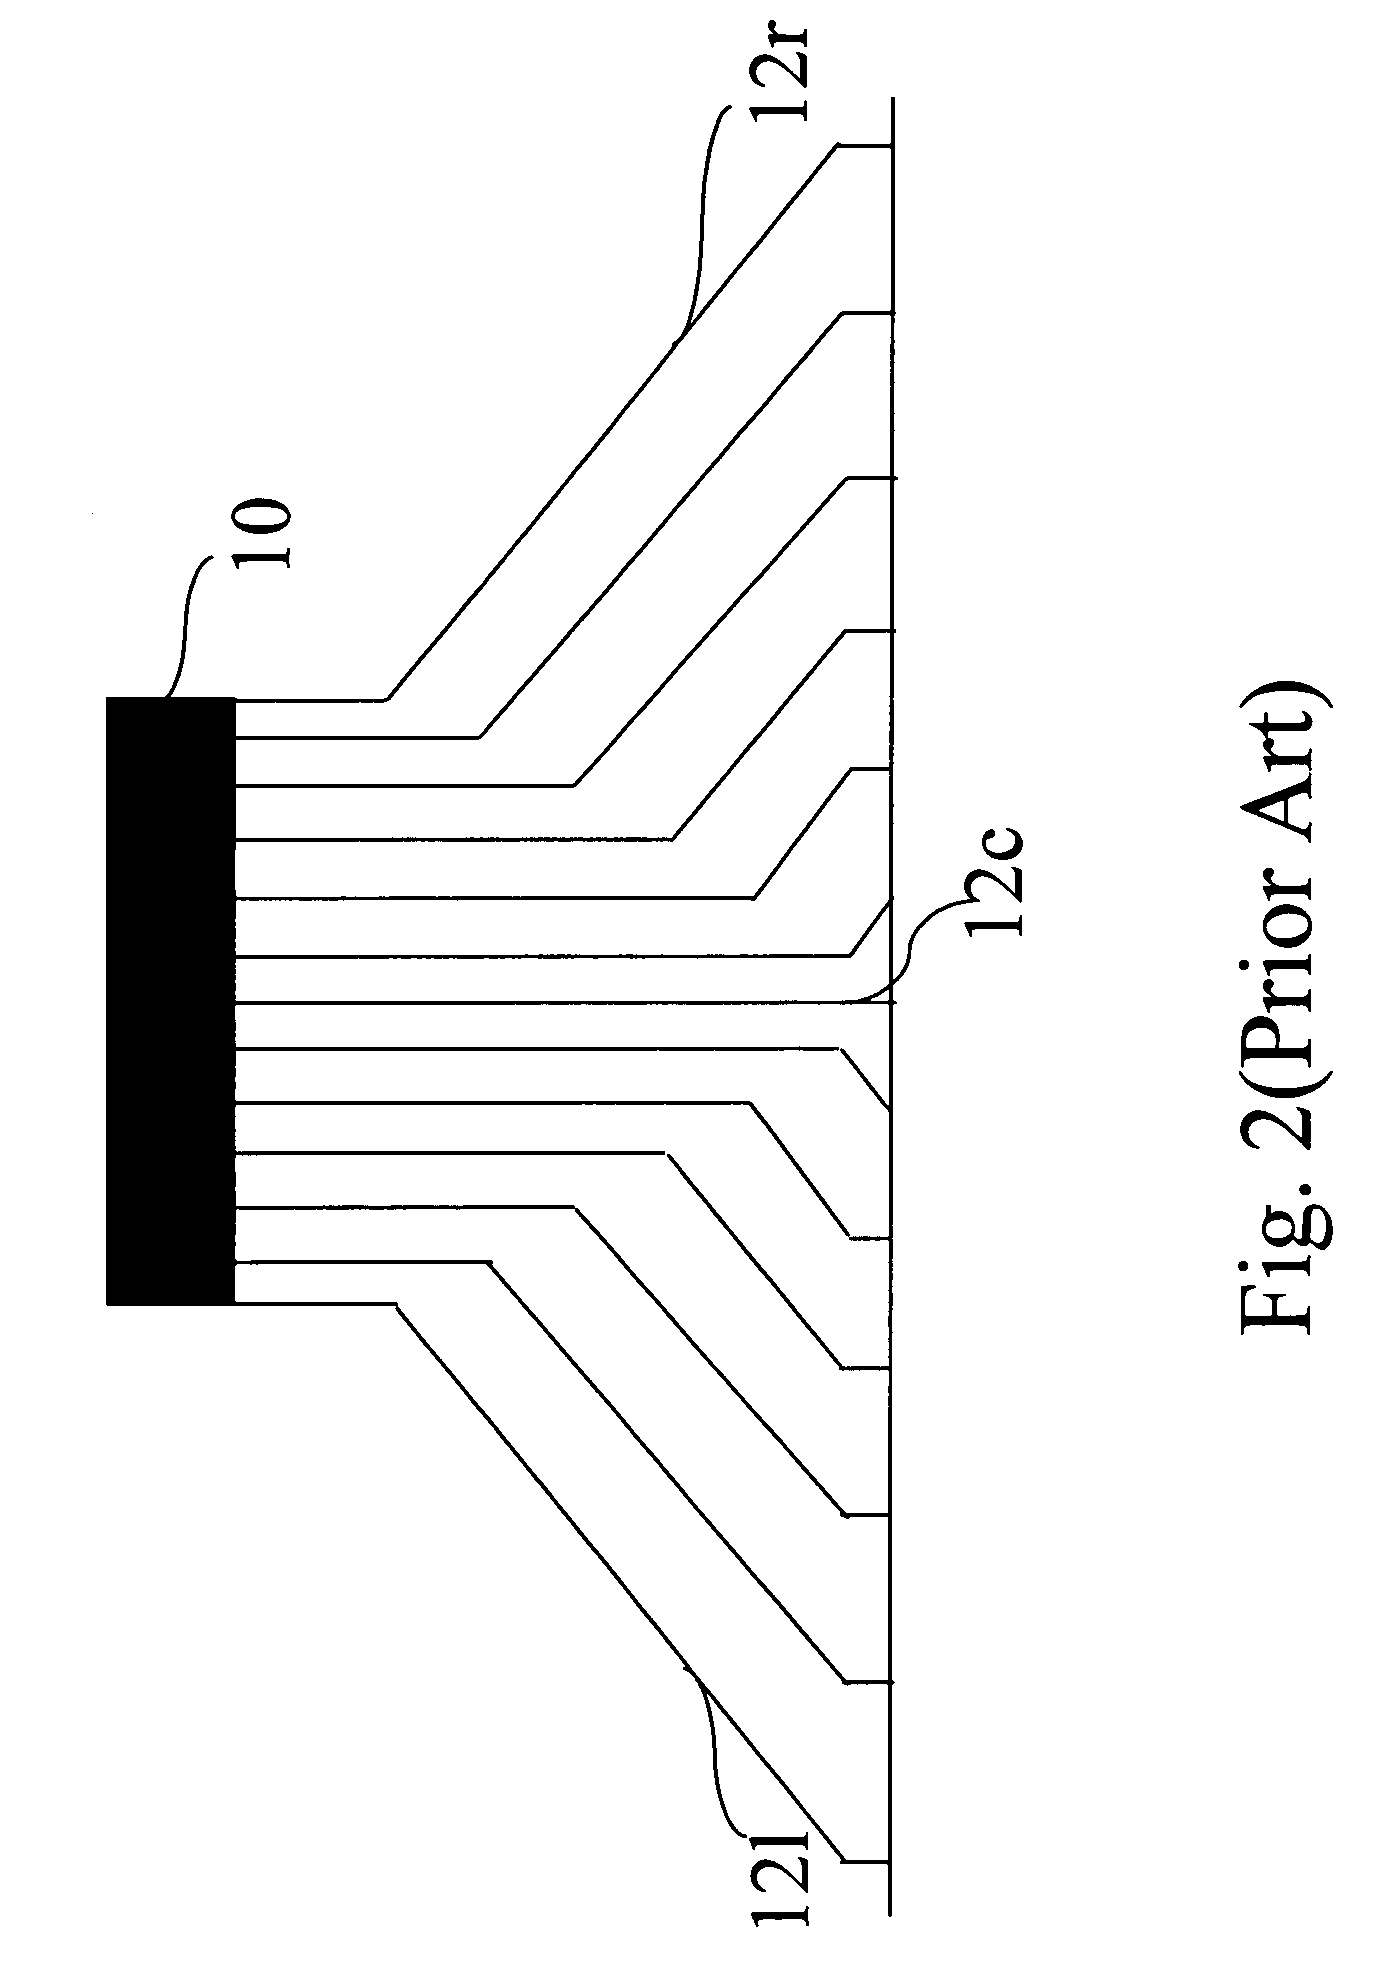 Uniform impedance conducting lines for a liquid crystal display